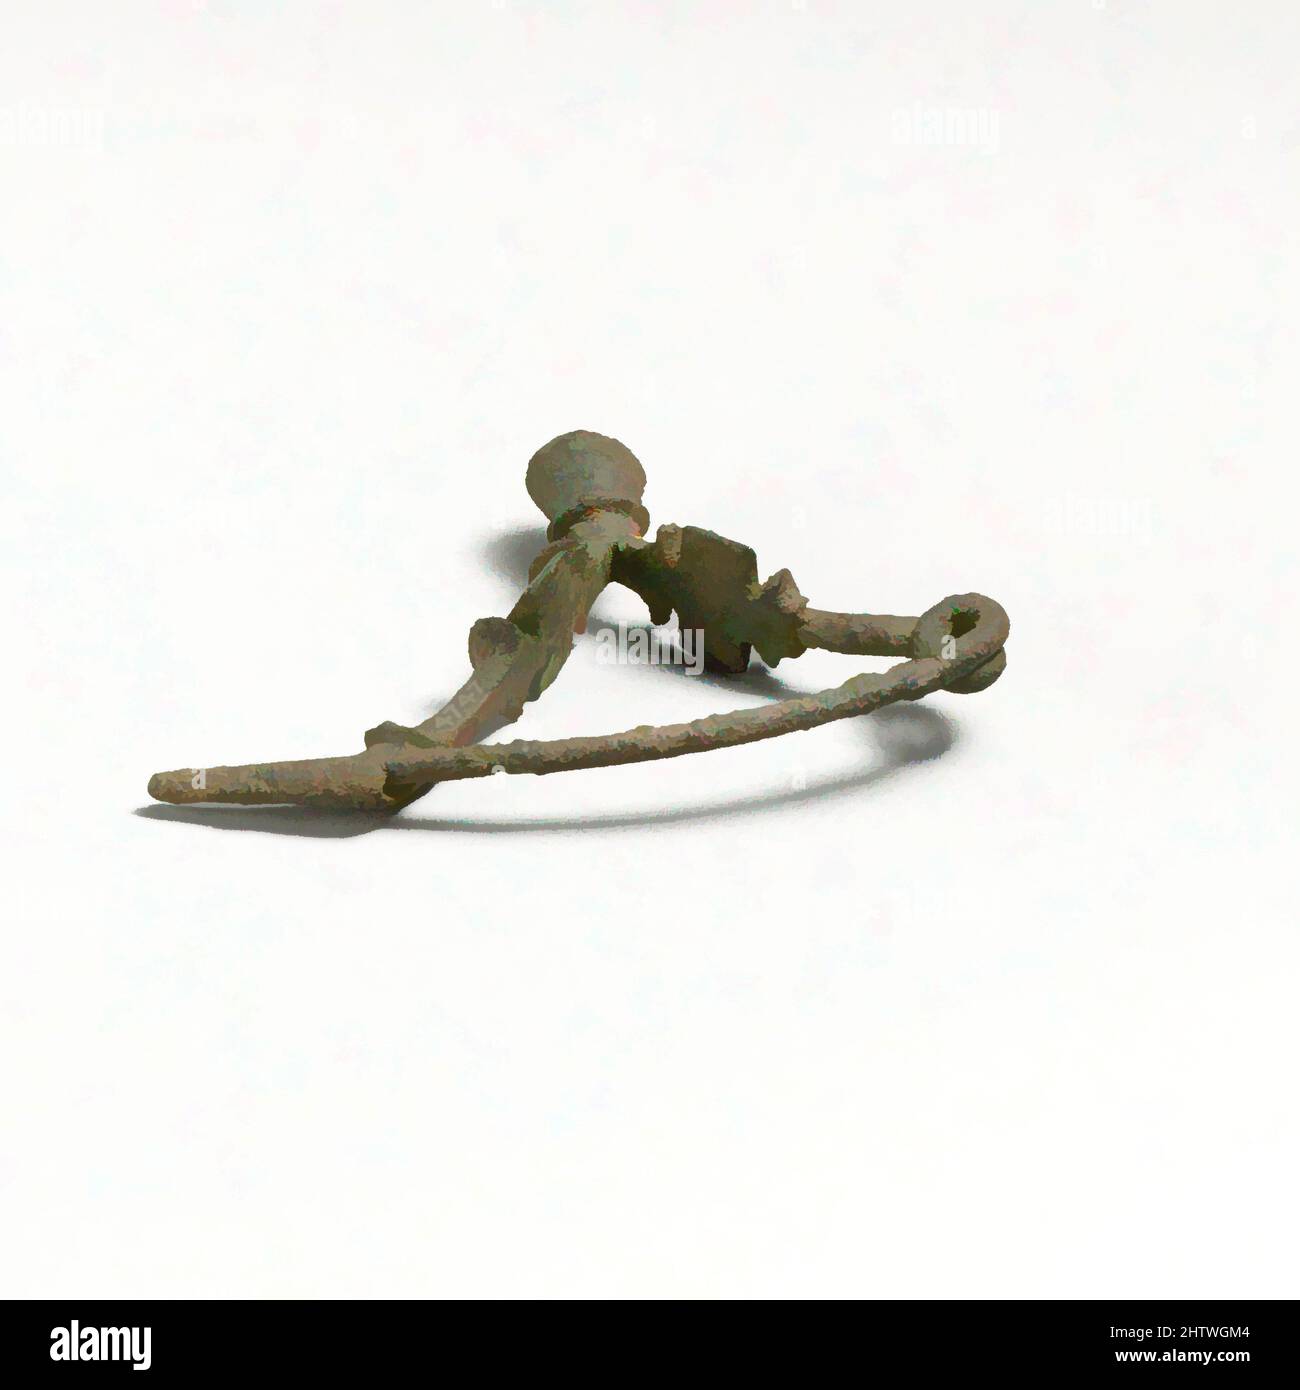 Art inspired by Bronze fibula (safety pin), Geometric, ca. 8th century B.C., Cypriot, Bronze, length 3 5/8in. (9.2cm), Bronzes, Bow bent up at an angle, knob on top slightly flattened with a small collar; head formed by a spiral of one turn. Fibulas of this type are purely Cypriot, Classic works modernized by Artotop with a splash of modernity. Shapes, color and value, eye-catching visual impact on art. Emotions through freedom of artworks in a contemporary way. A timeless message pursuing a wildly creative new direction. Artists turning to the digital medium and creating the Artotop NFT Stock Photo